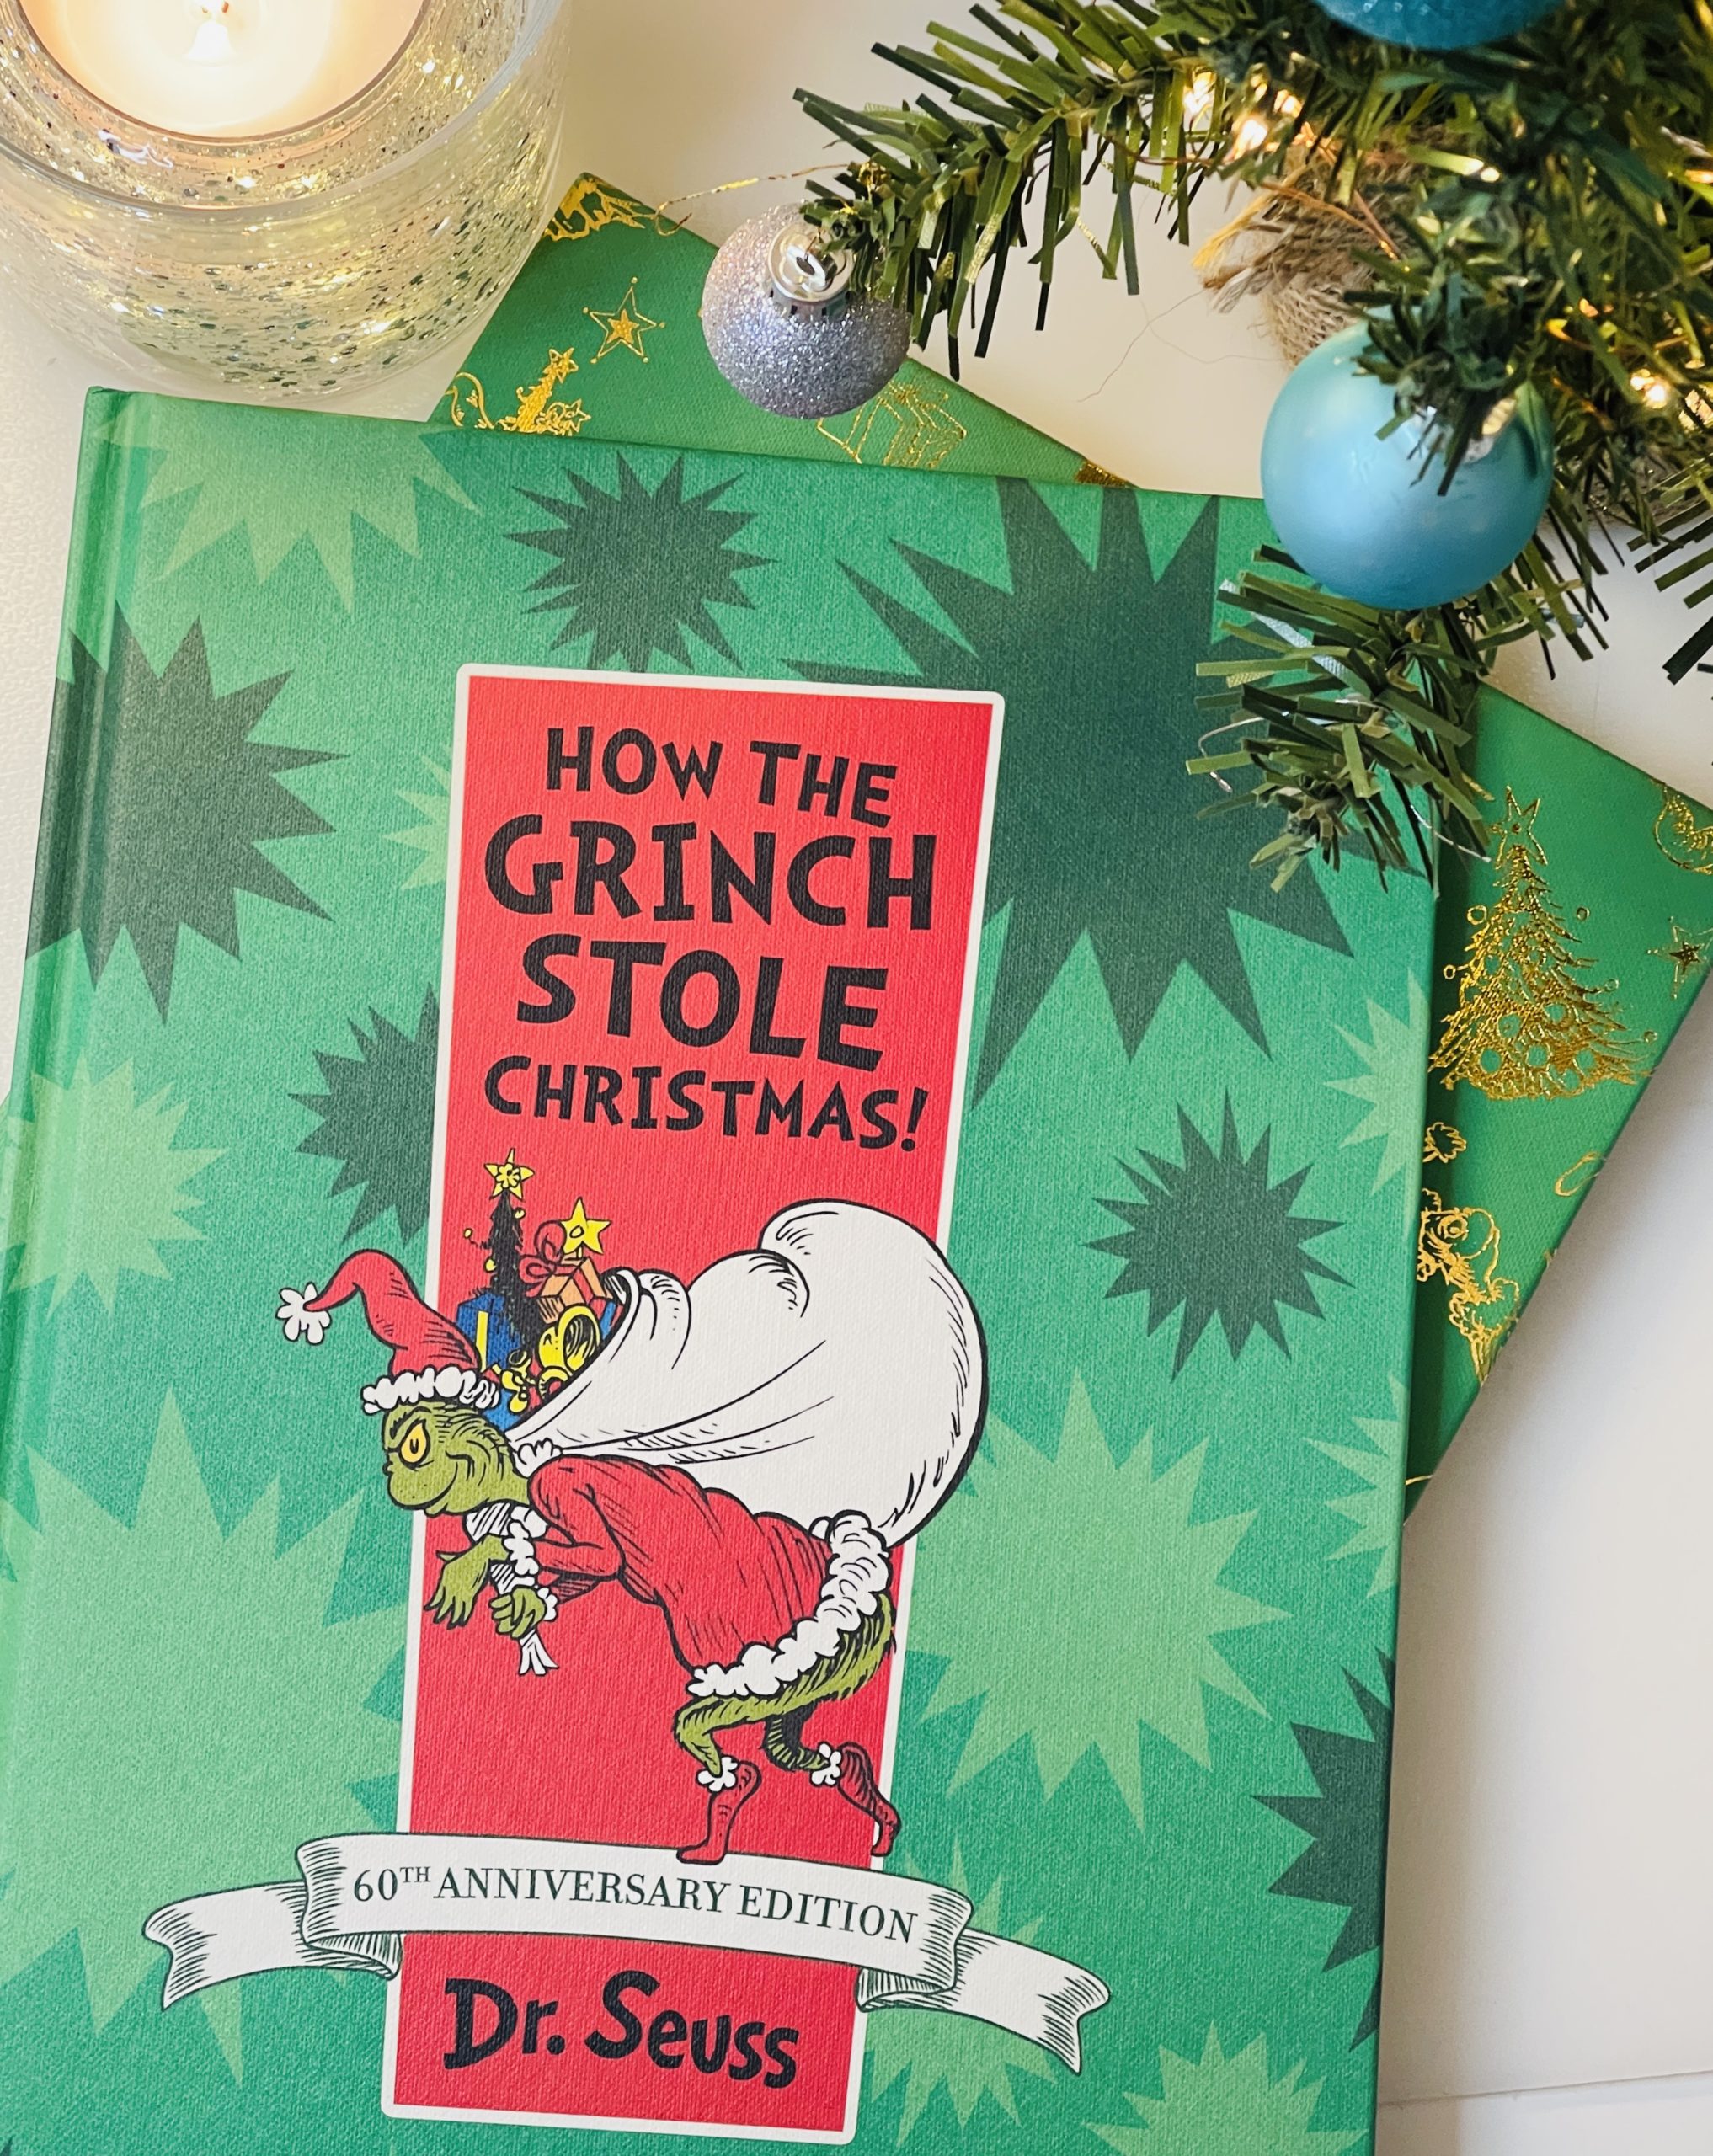 How The Grinch Stole Christmas by Dr Seuss - Tea Leaves & Reads